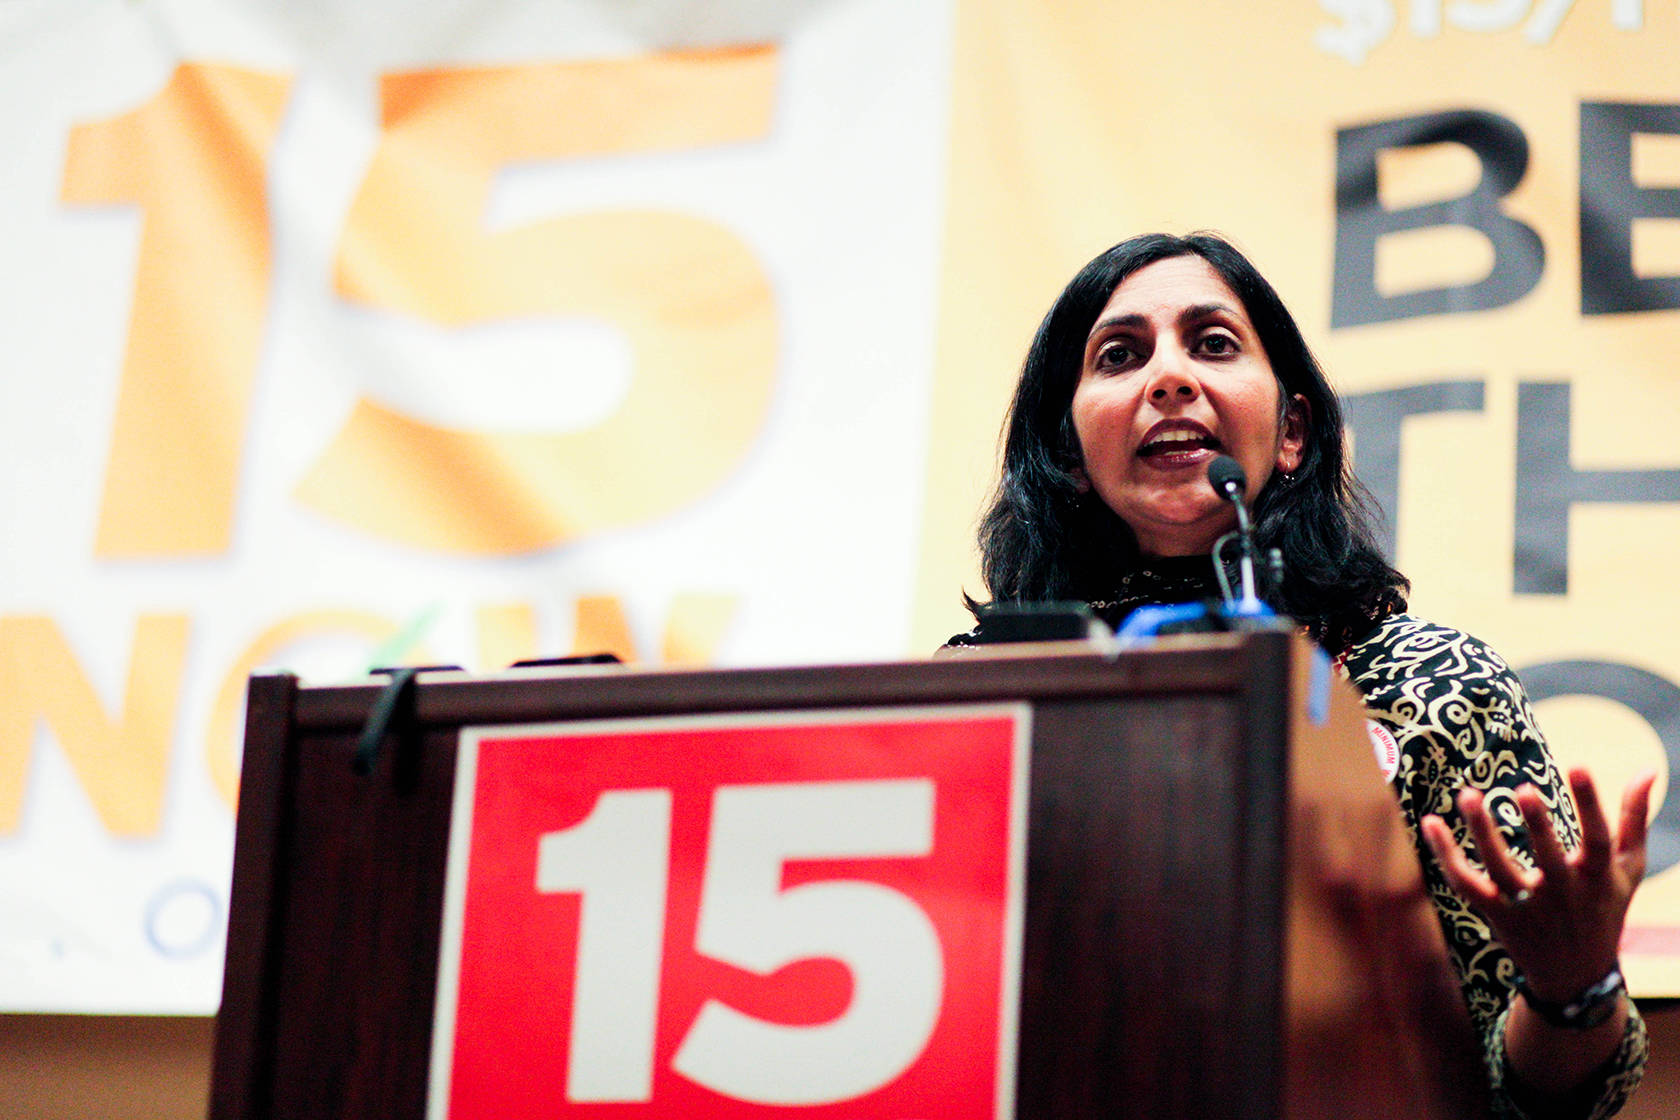 Seattle City Councilmember Kshama Sawant during the campaign for a $15 minimum wage. SW file photo